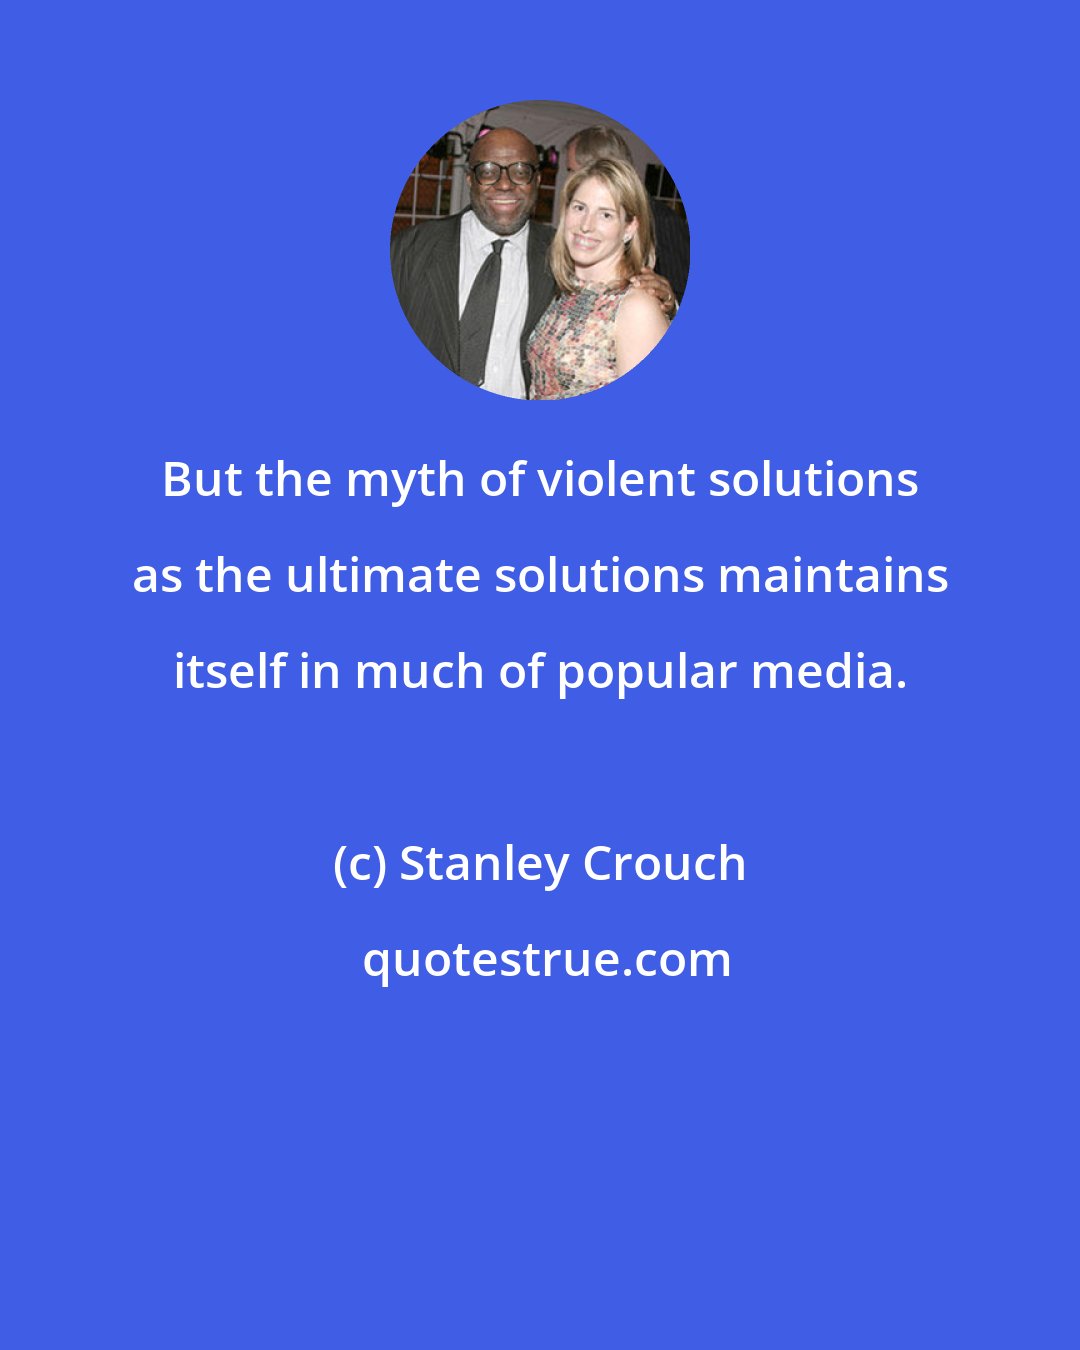 Stanley Crouch: But the myth of violent solutions as the ultimate solutions maintains itself in much of popular media.